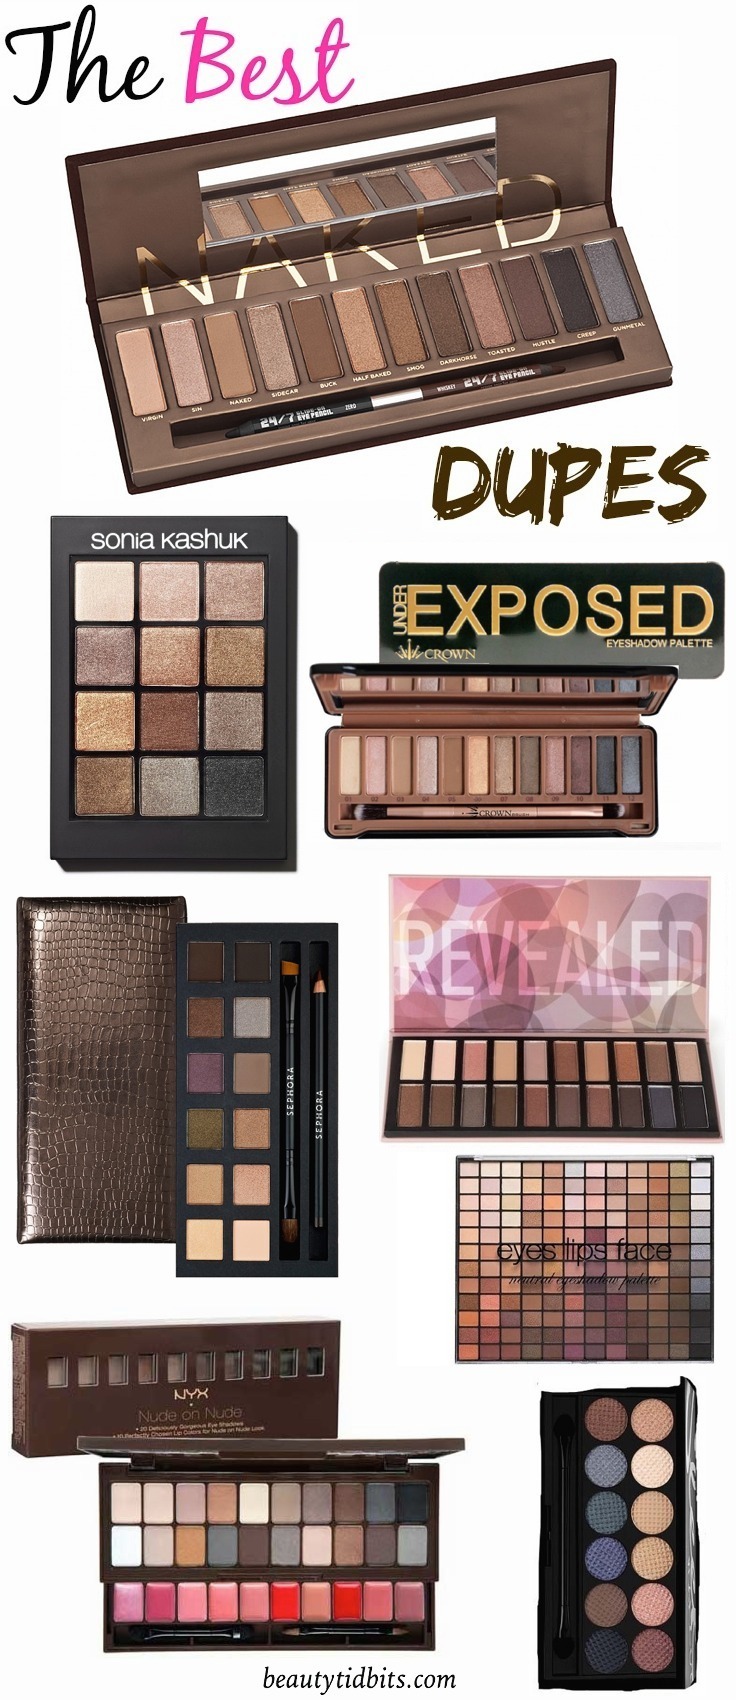 Looking for a near-perfect Naked palette dupe? Check out these 7 budget-friendly dupes for Urban Decay Naked palettes that give you the best bang for your buck!